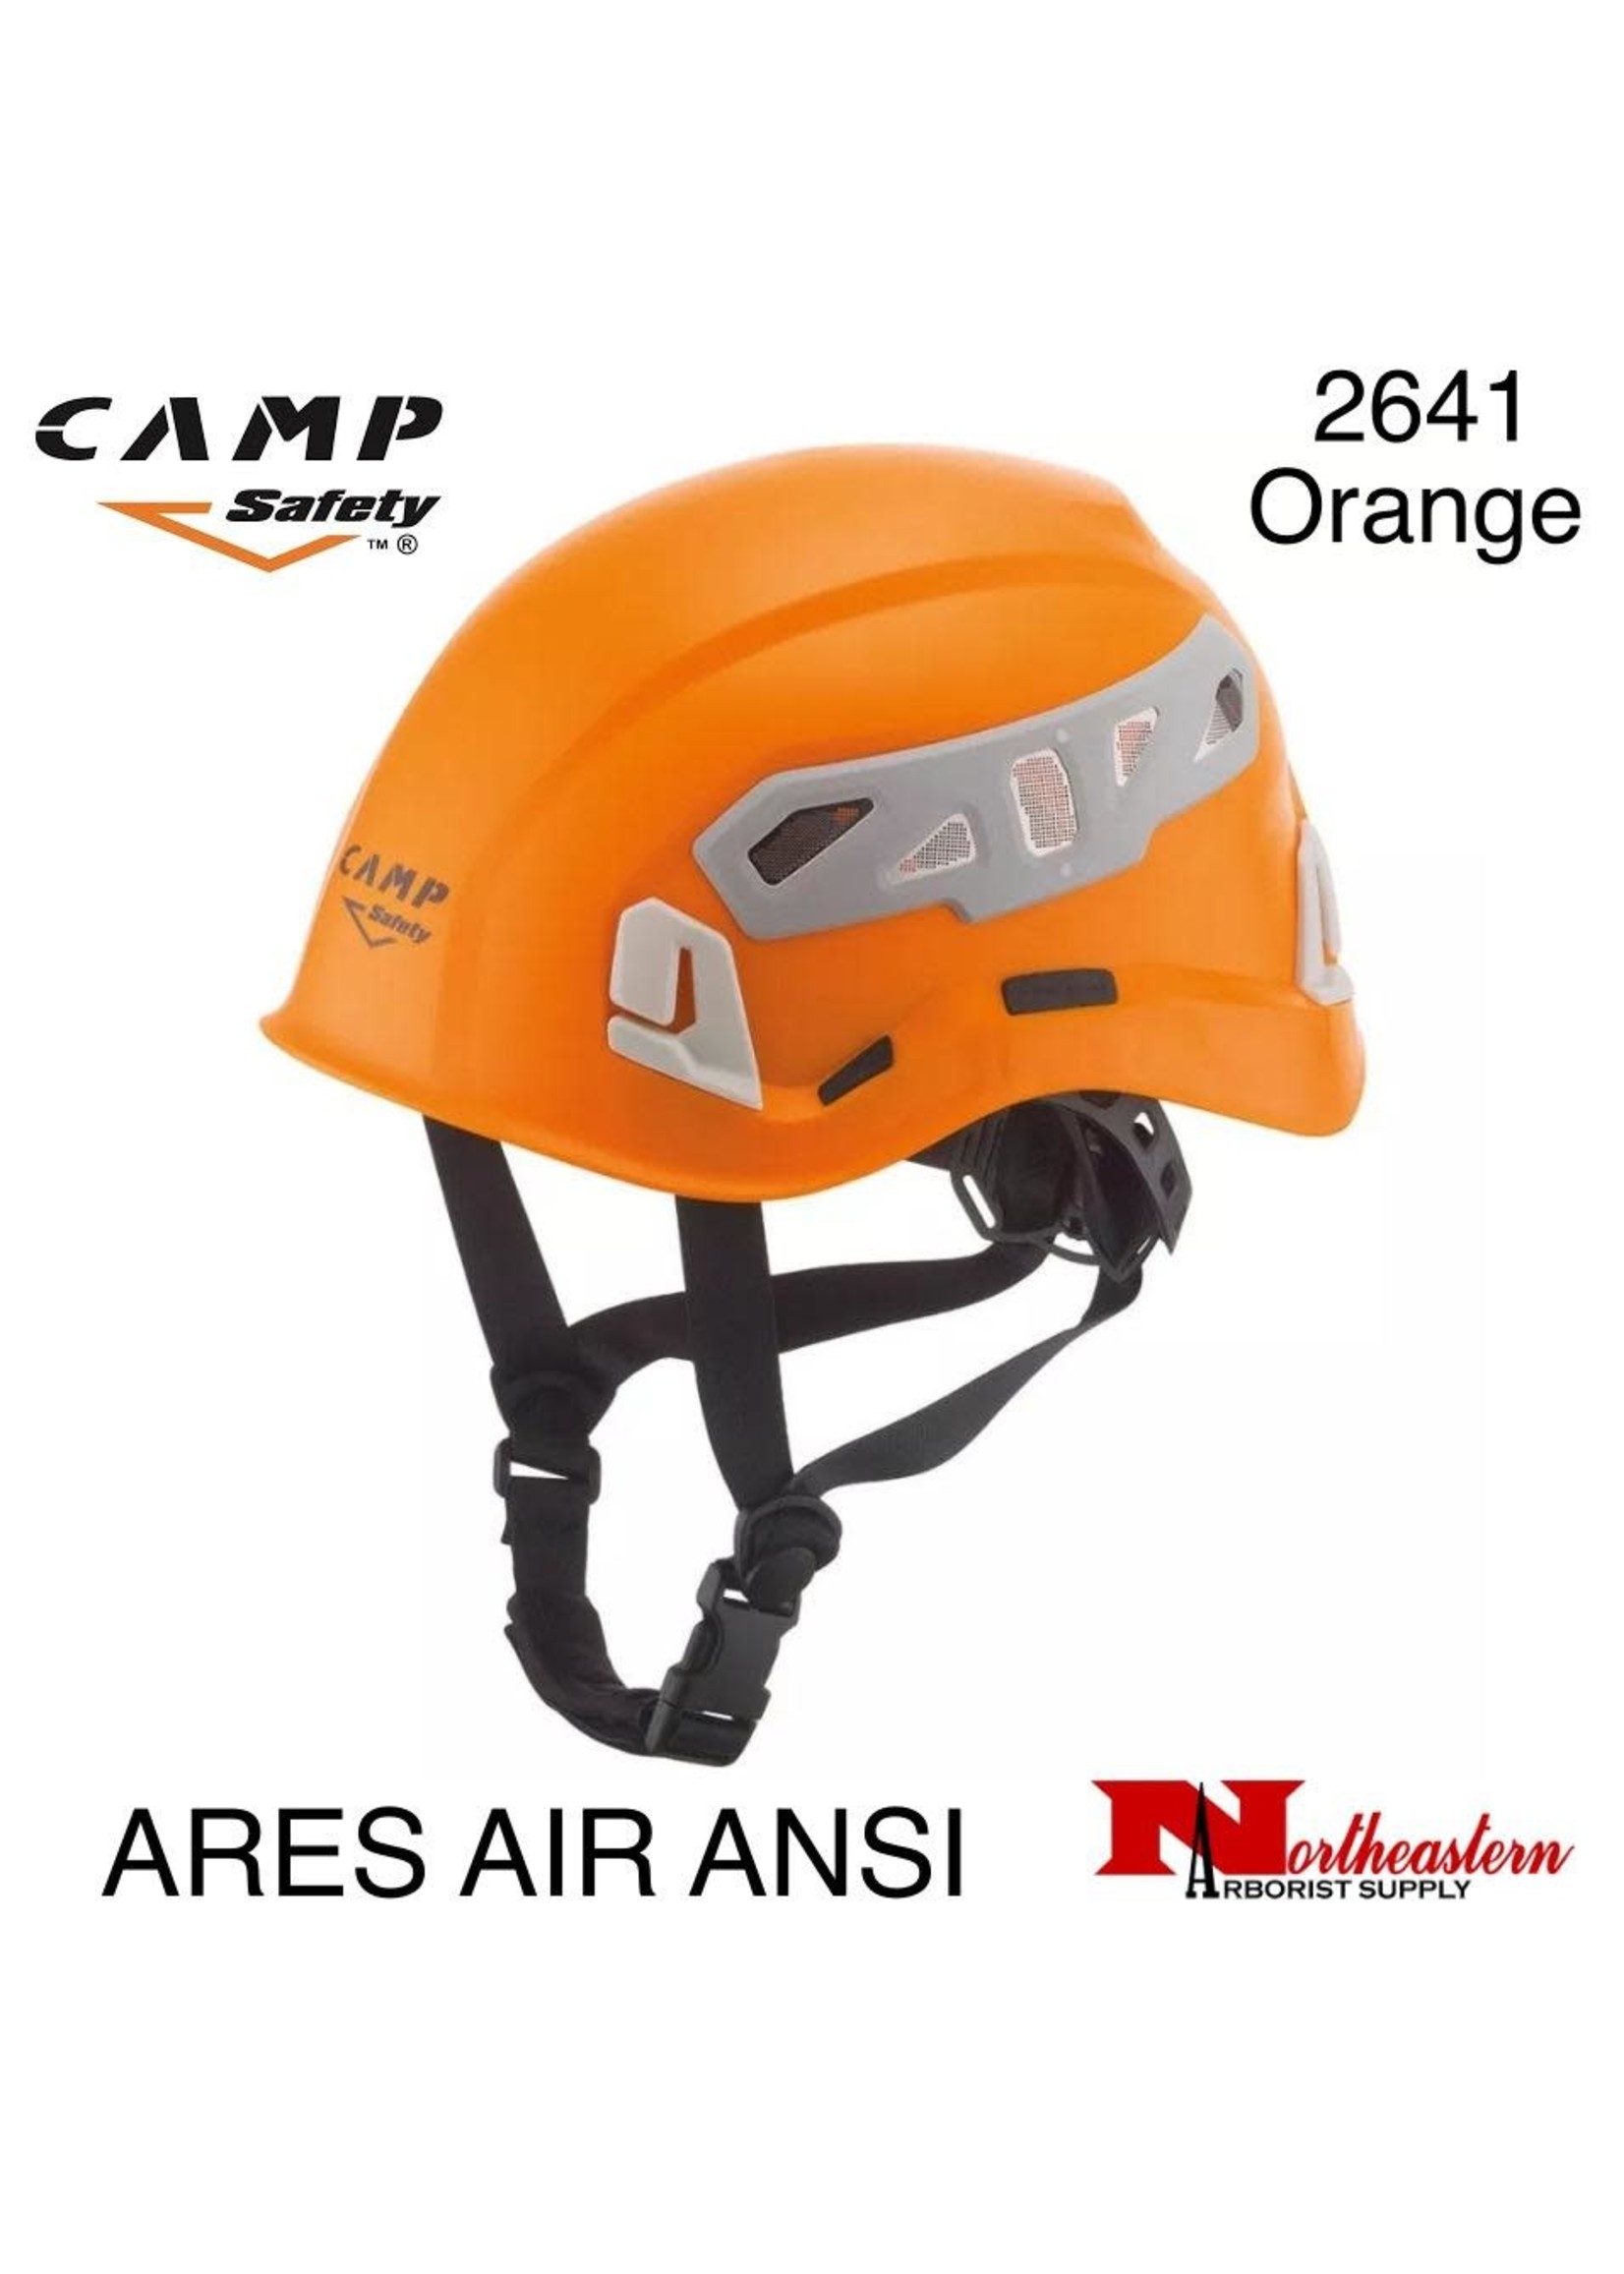 CAMP SAFETY ARES AIR ANSI, Ventilated Helmet